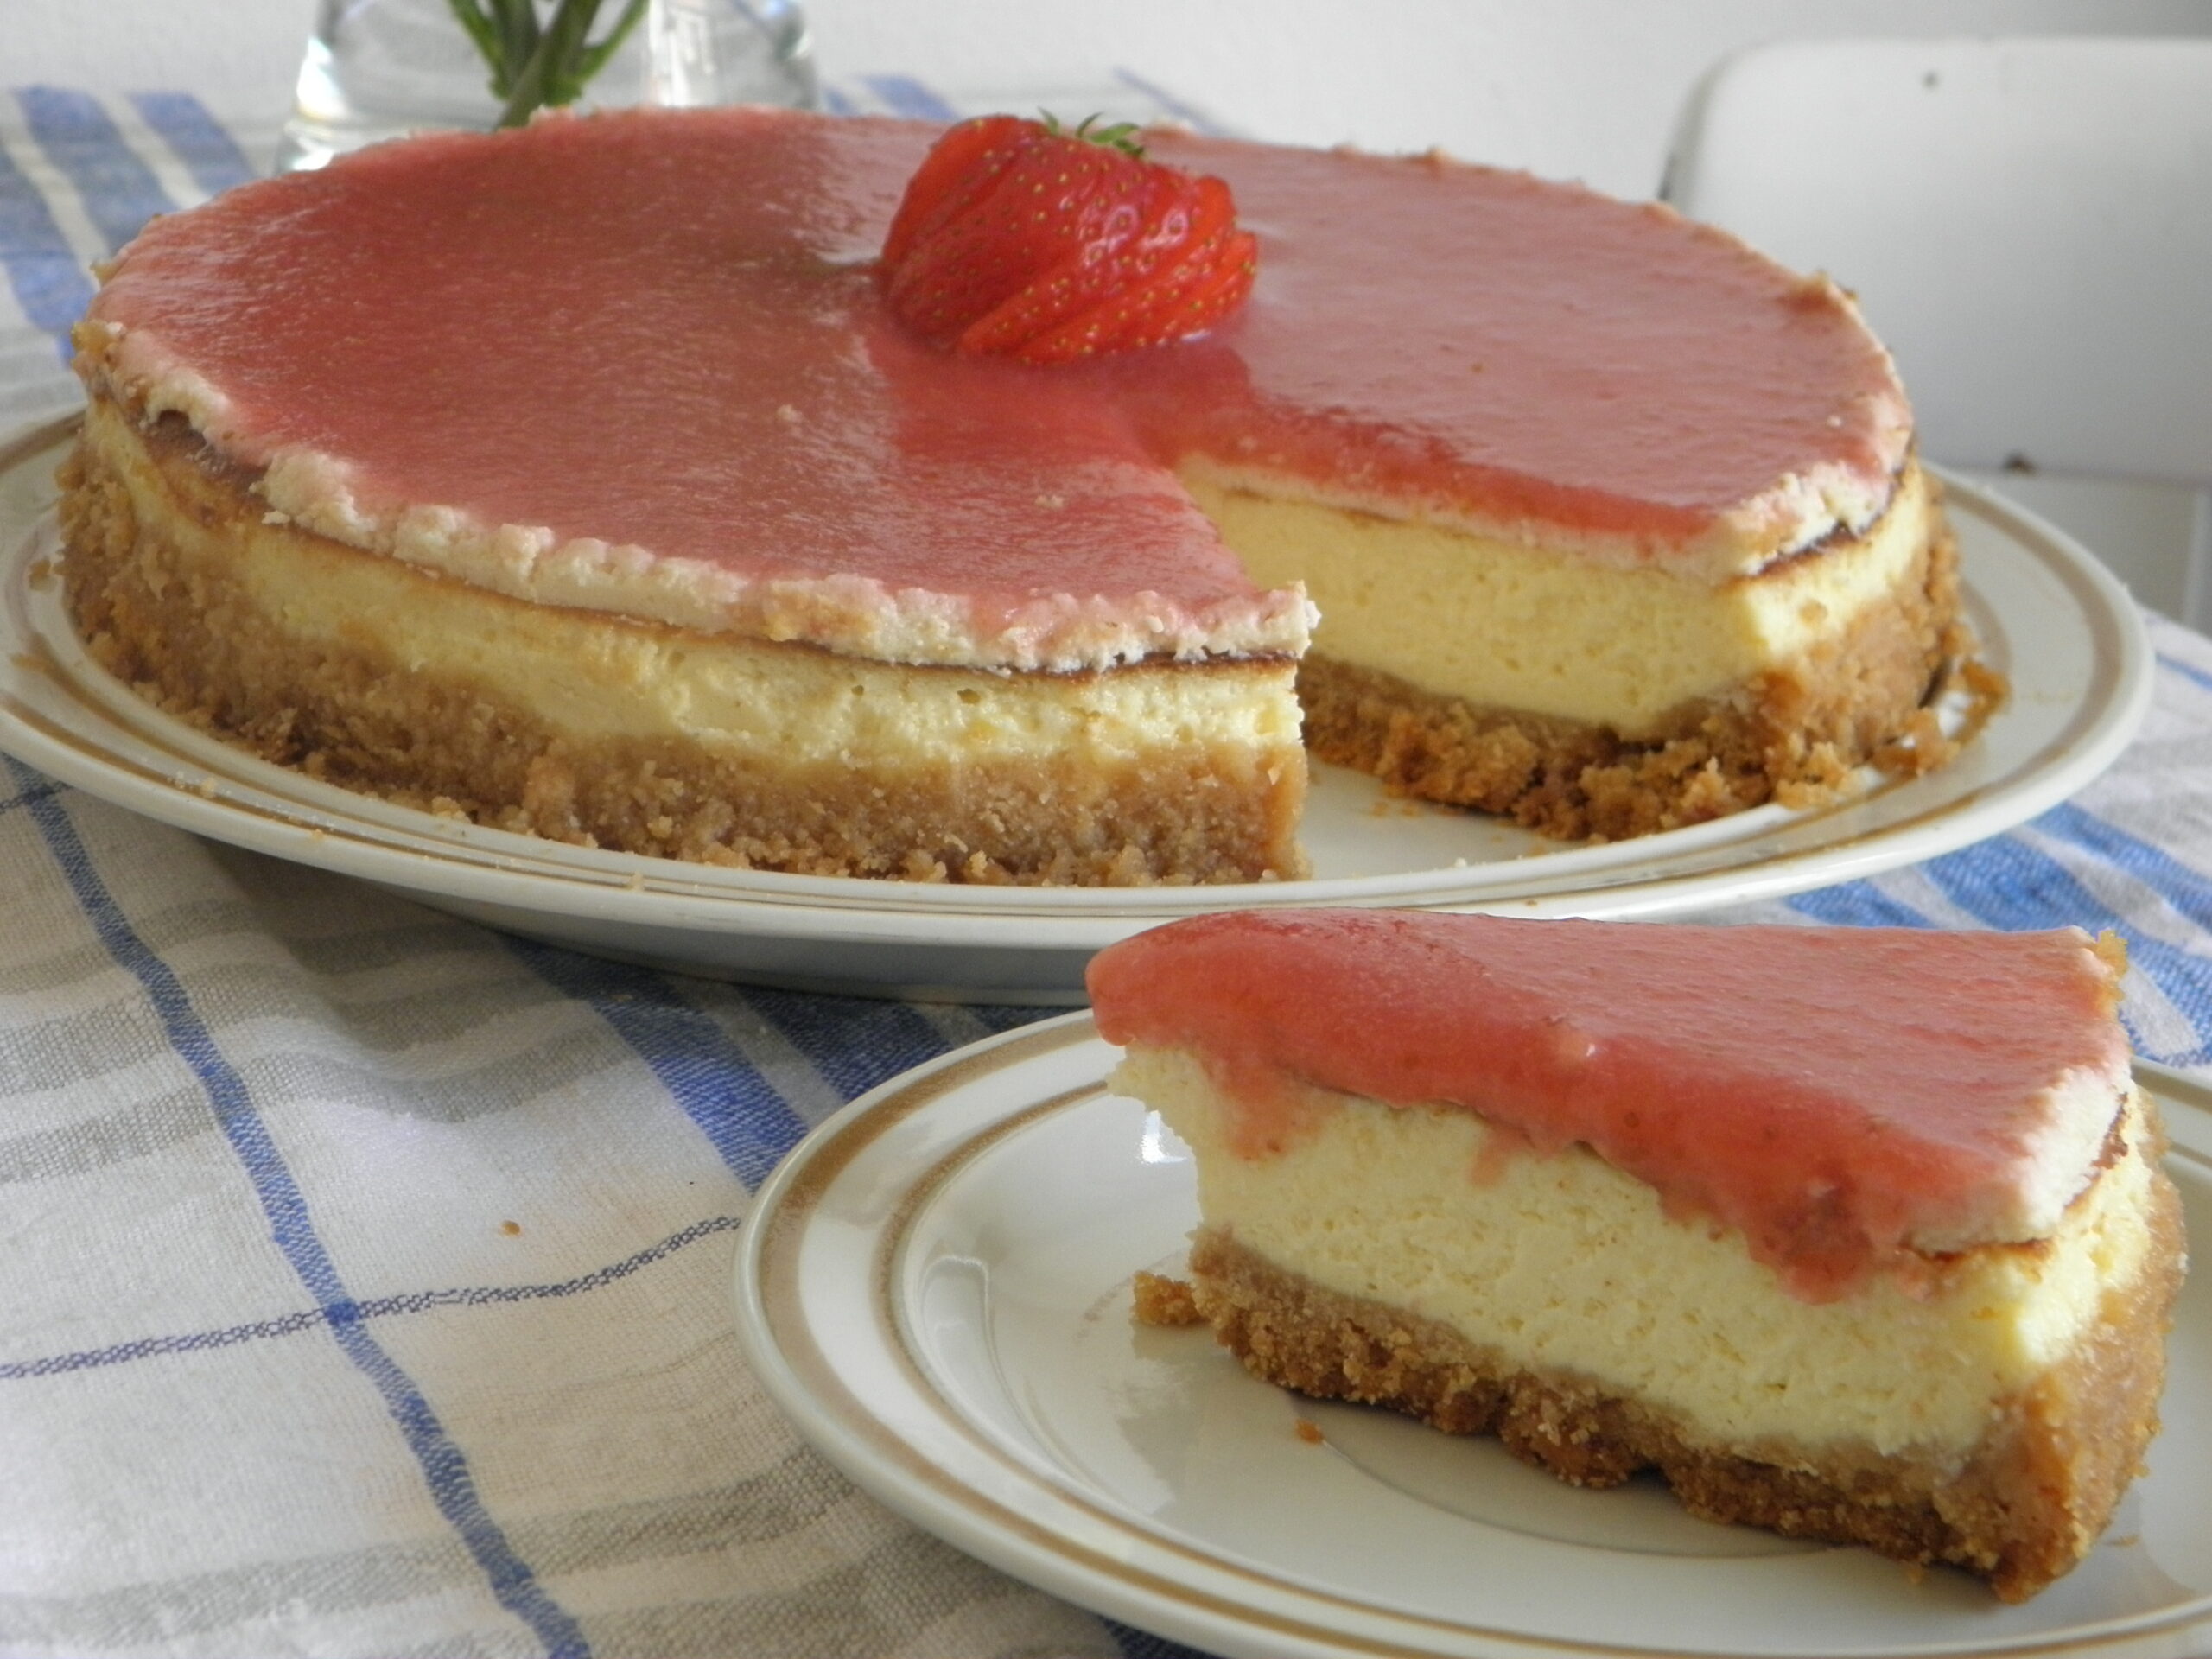 New York Cheesecake with Strawberry sauce topping - Cooking Delight